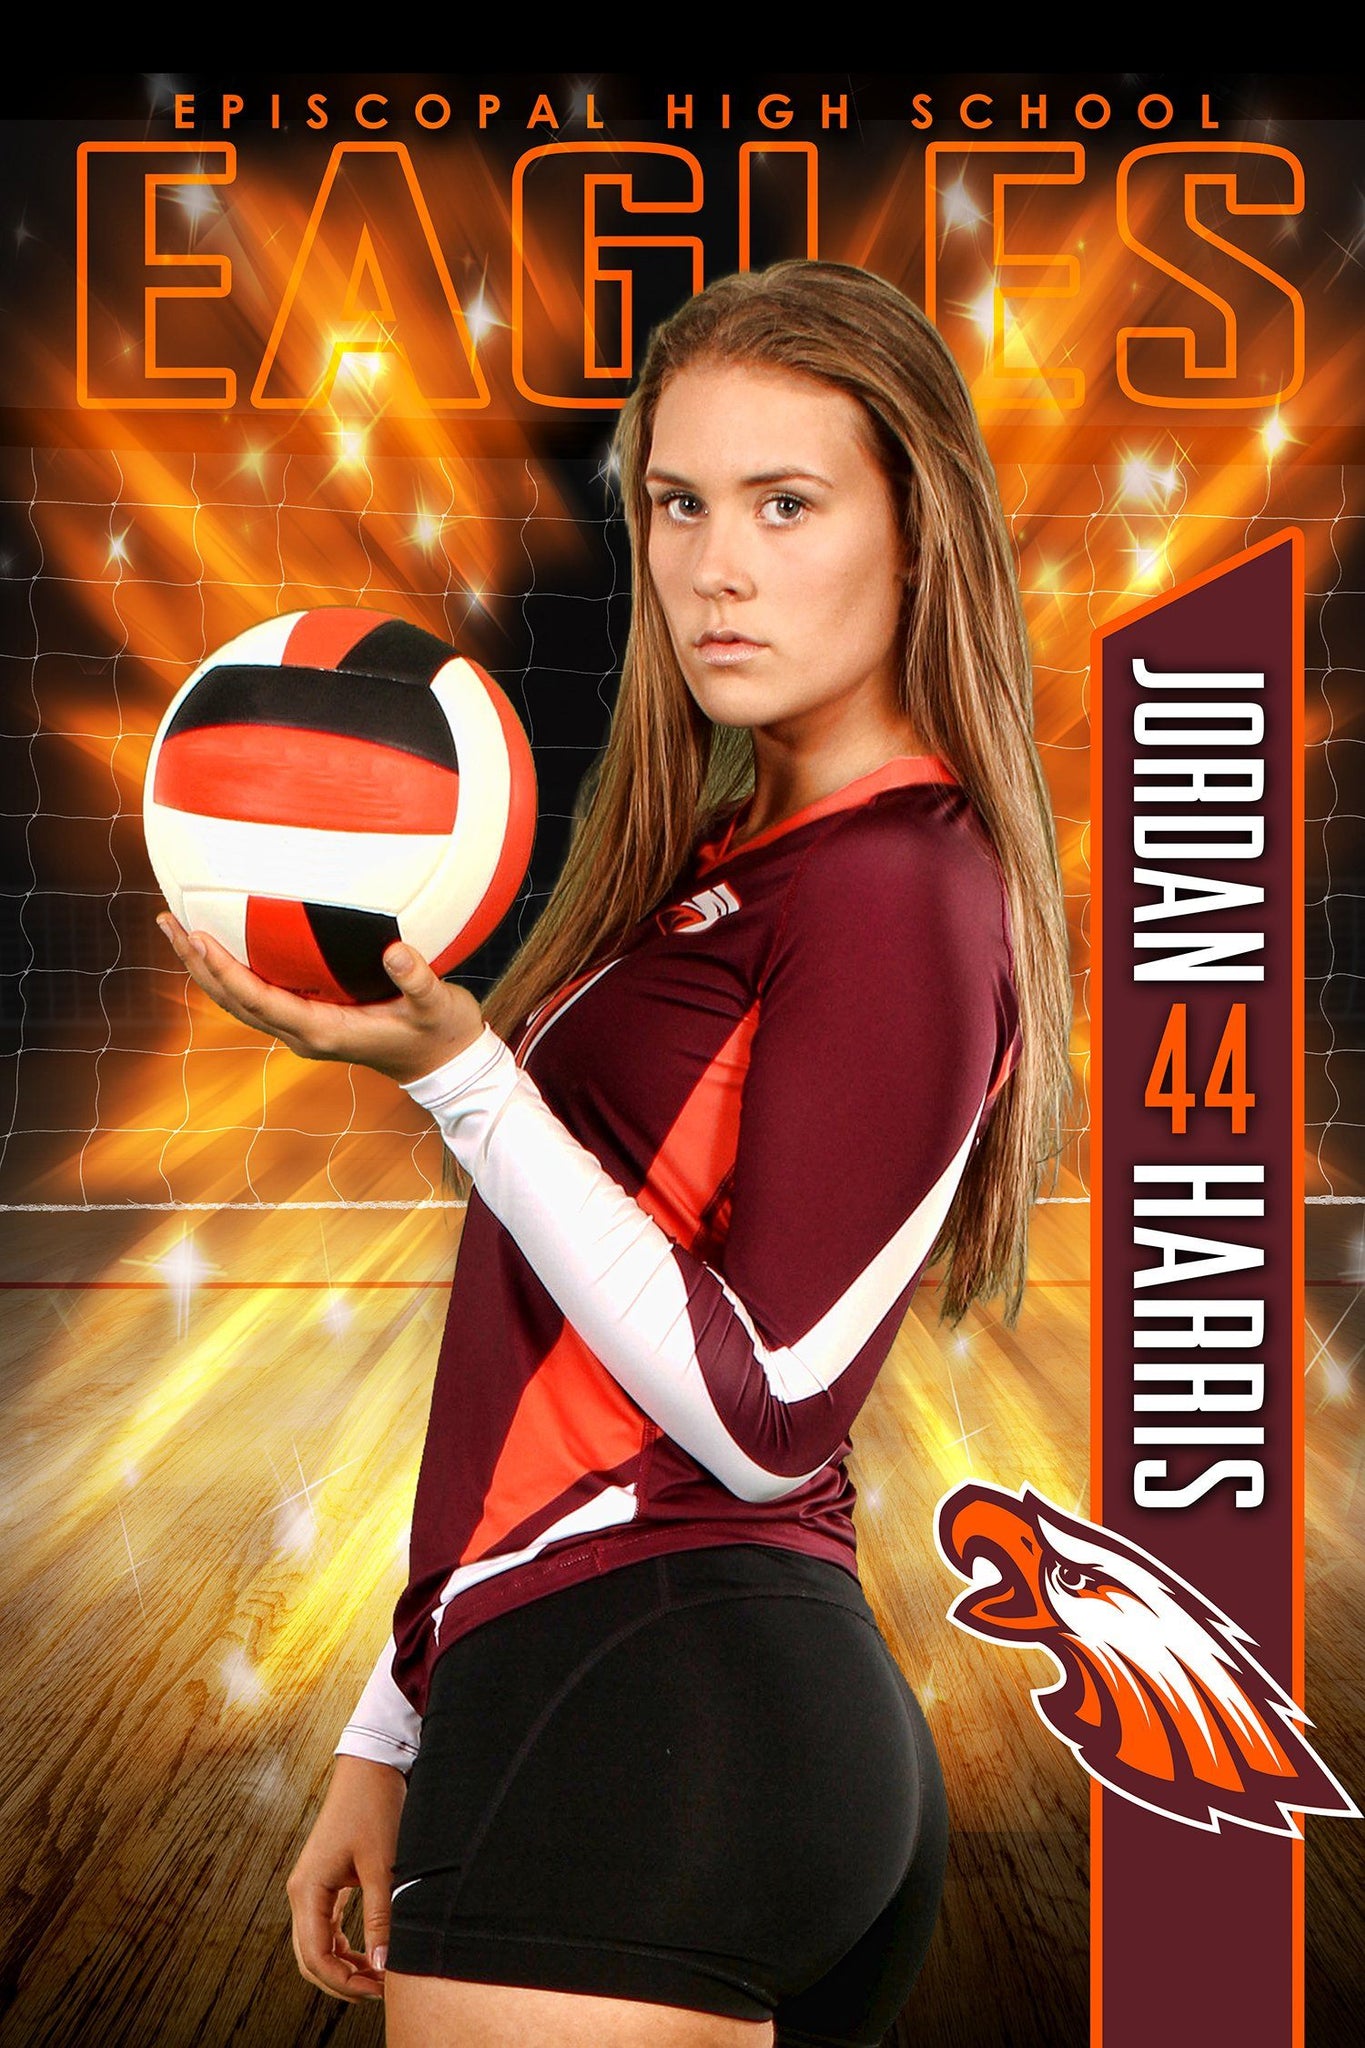 X Factor Volleyball - Cinema Series - Poster/Banner Template-Photoshop Template - PSMGraphix